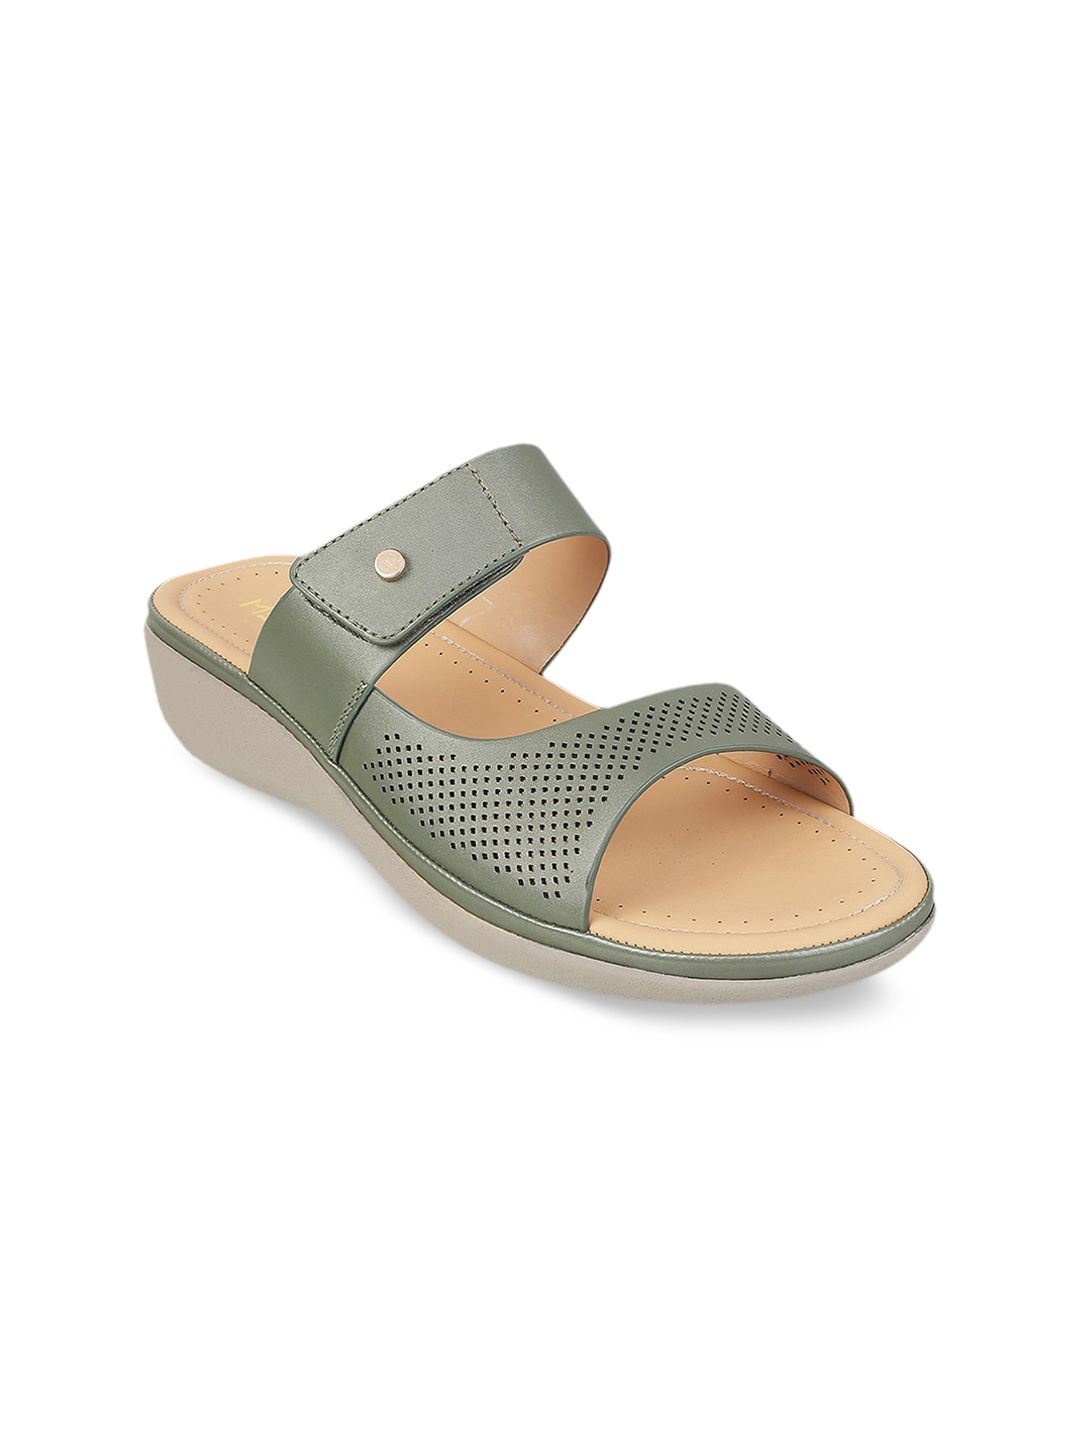 Metro Green Comfort Sandals with Laser Cuts Price in India